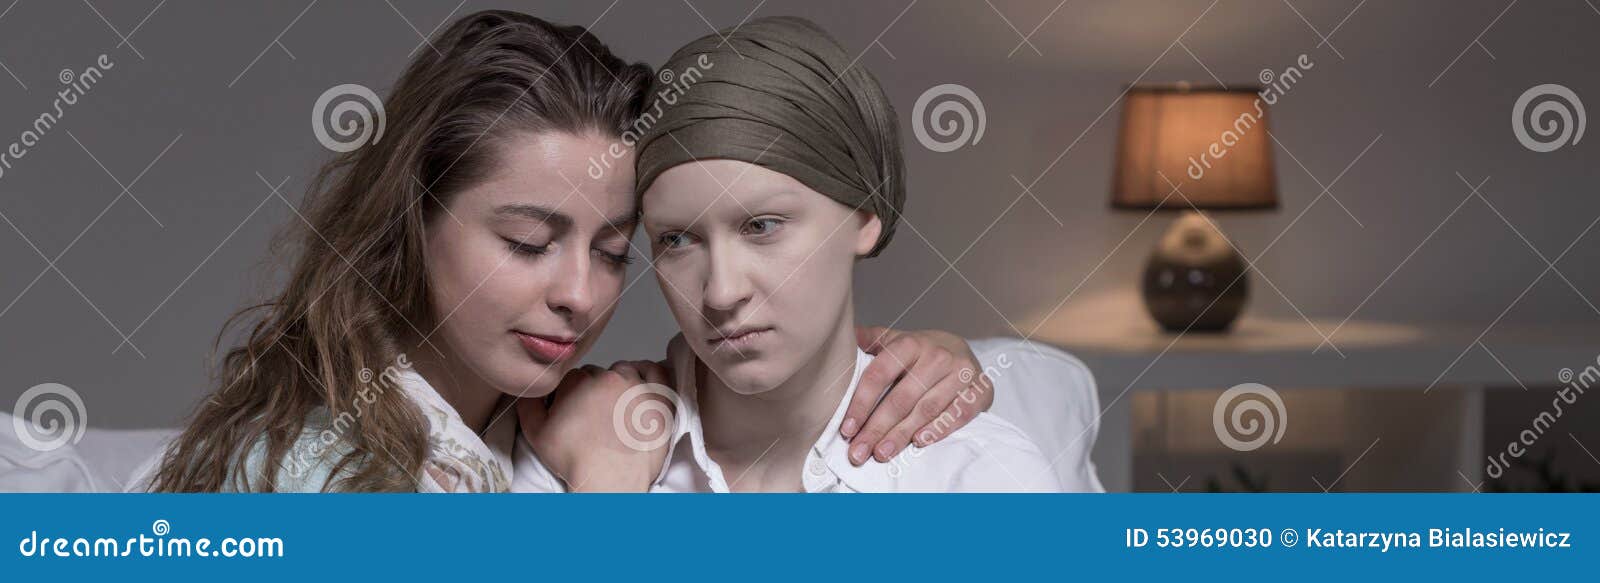 friend supporting cancer woman